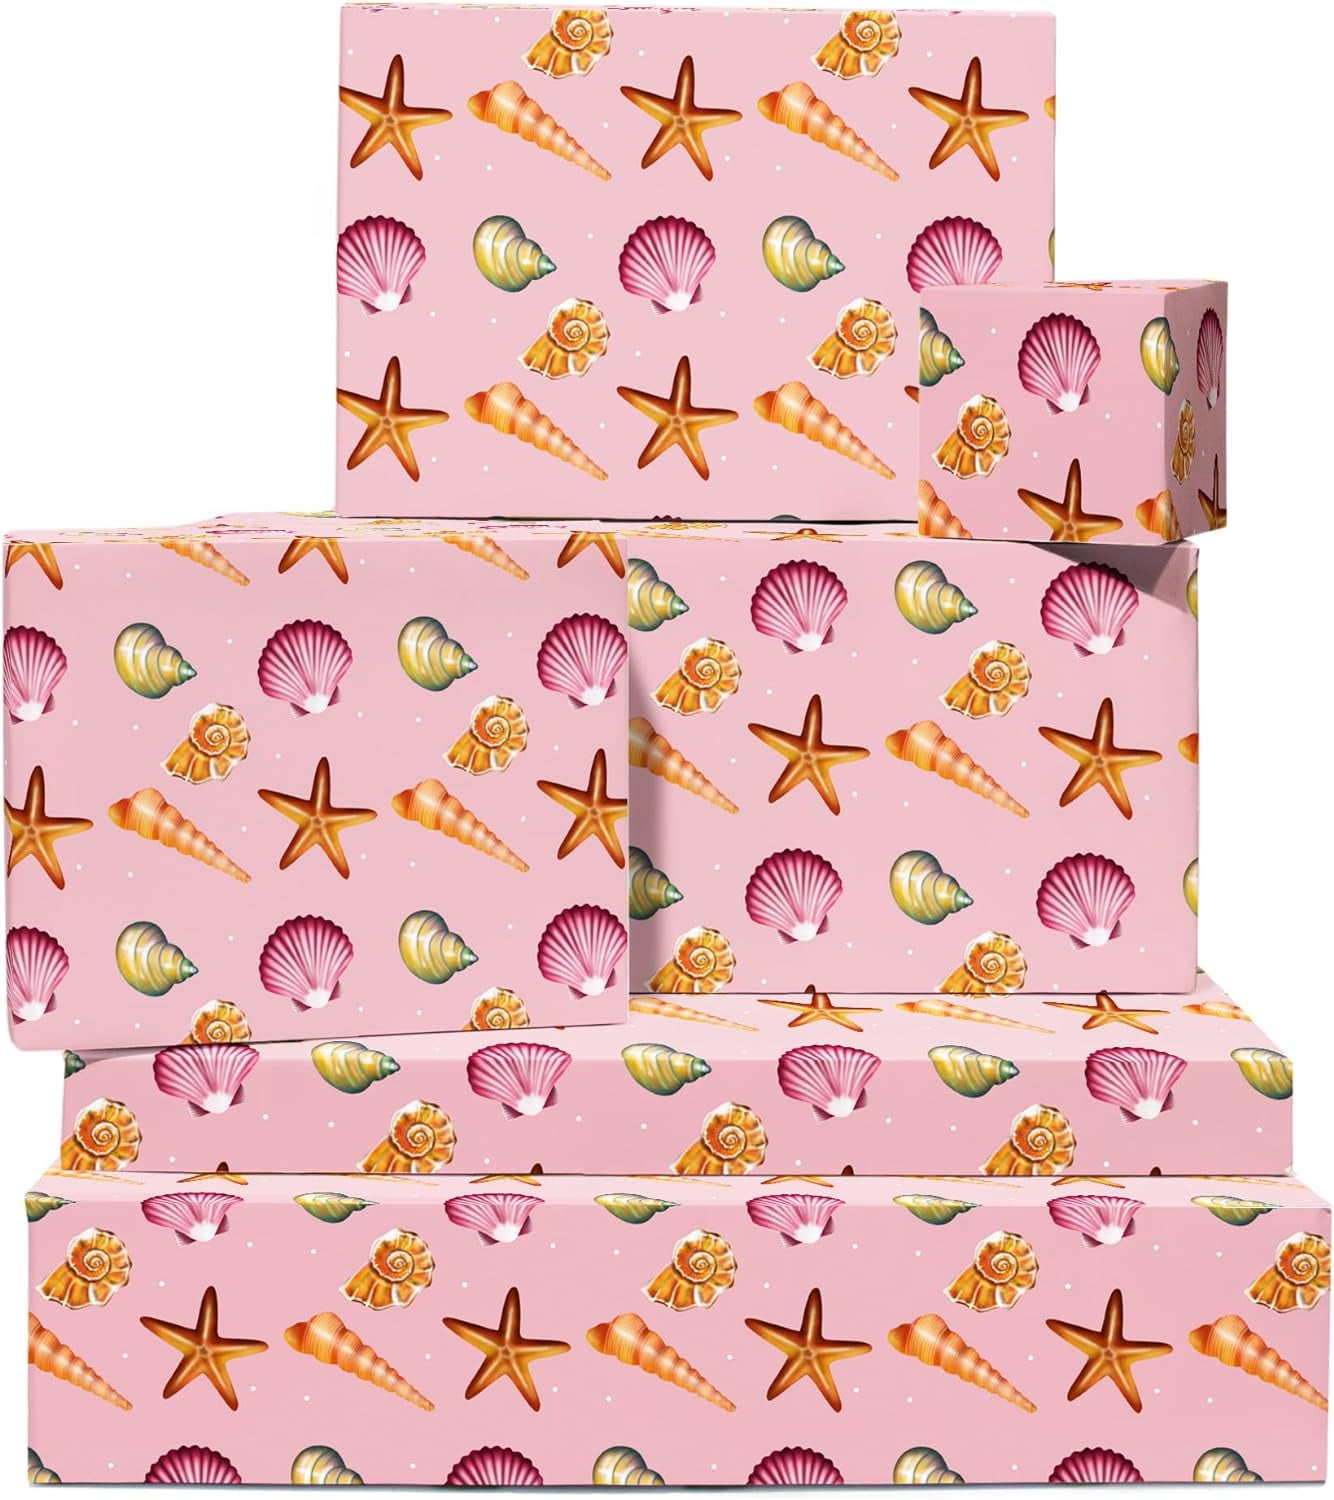 Birthday Wrapping Paper Kit with Cut Lines, Bows and Gift Tags, Balloons,  Candles, and Fireworks (7 Bows, 30 Gift Tags, 4 Rolls, 120 sq. ft) 